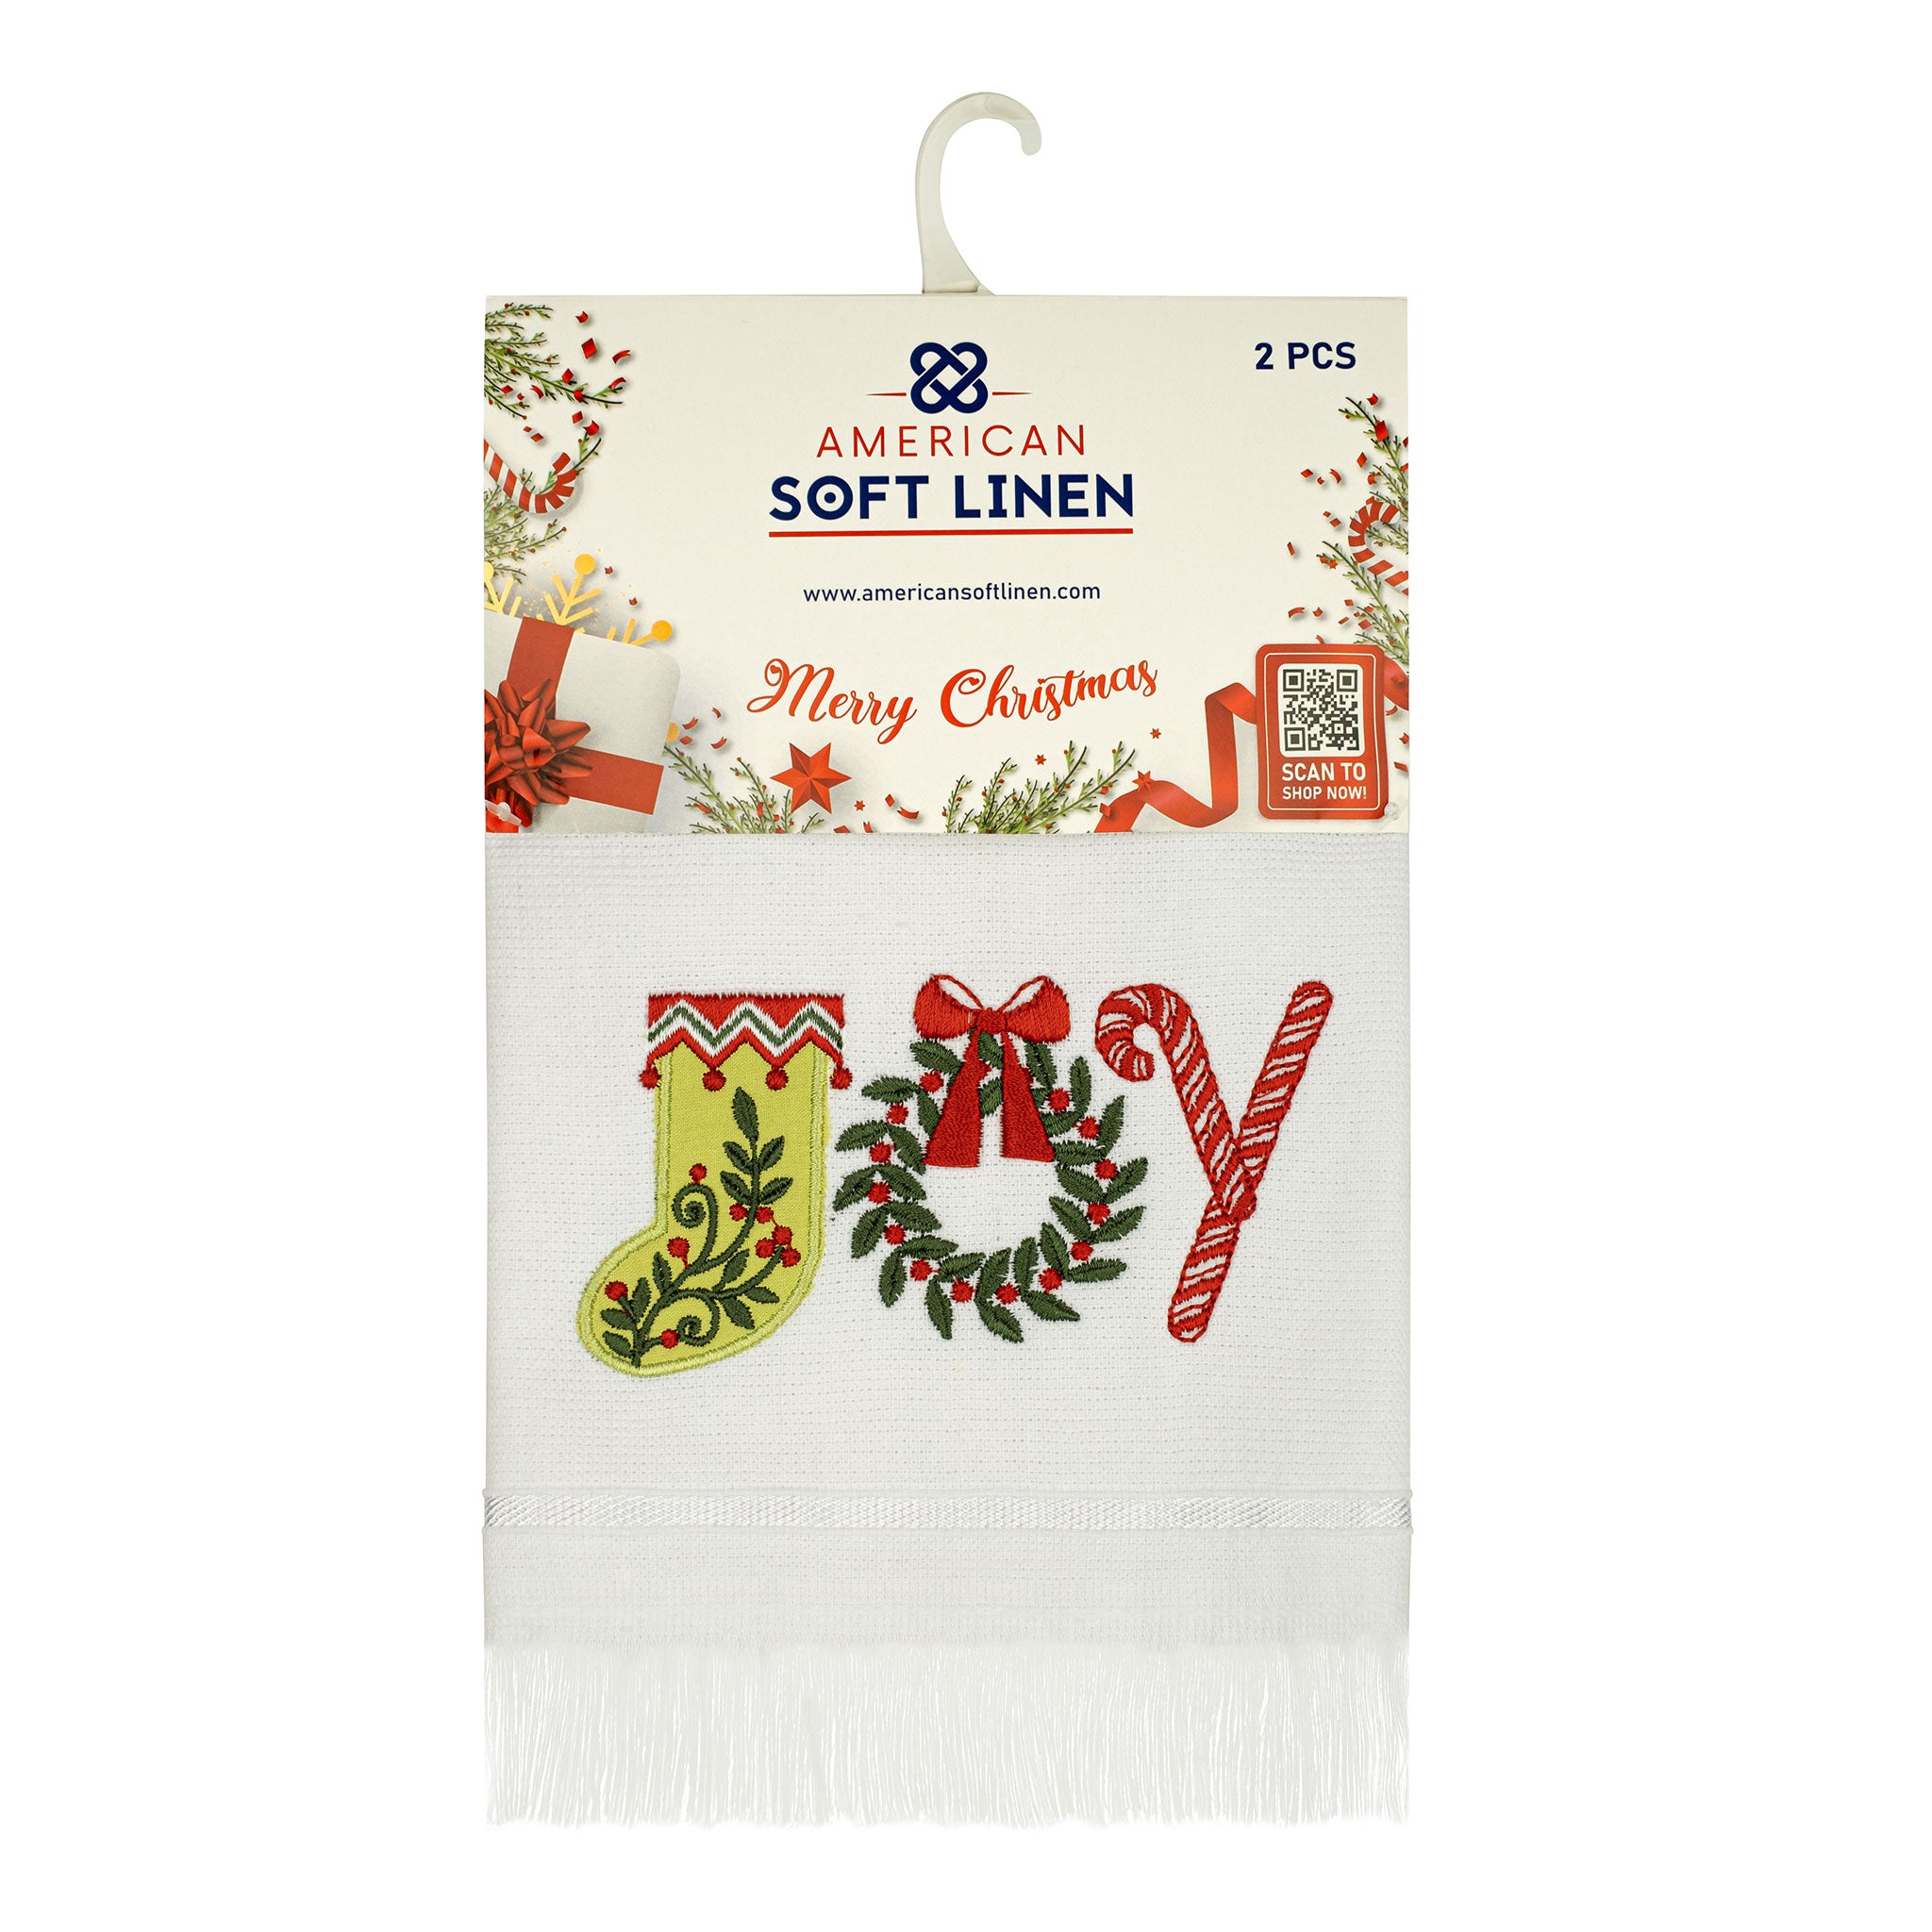  American Soft Linen - Christmas Towels Set 2 Packed Embroidered Turkish Cotton Hand Towels - Joy Cat - 9